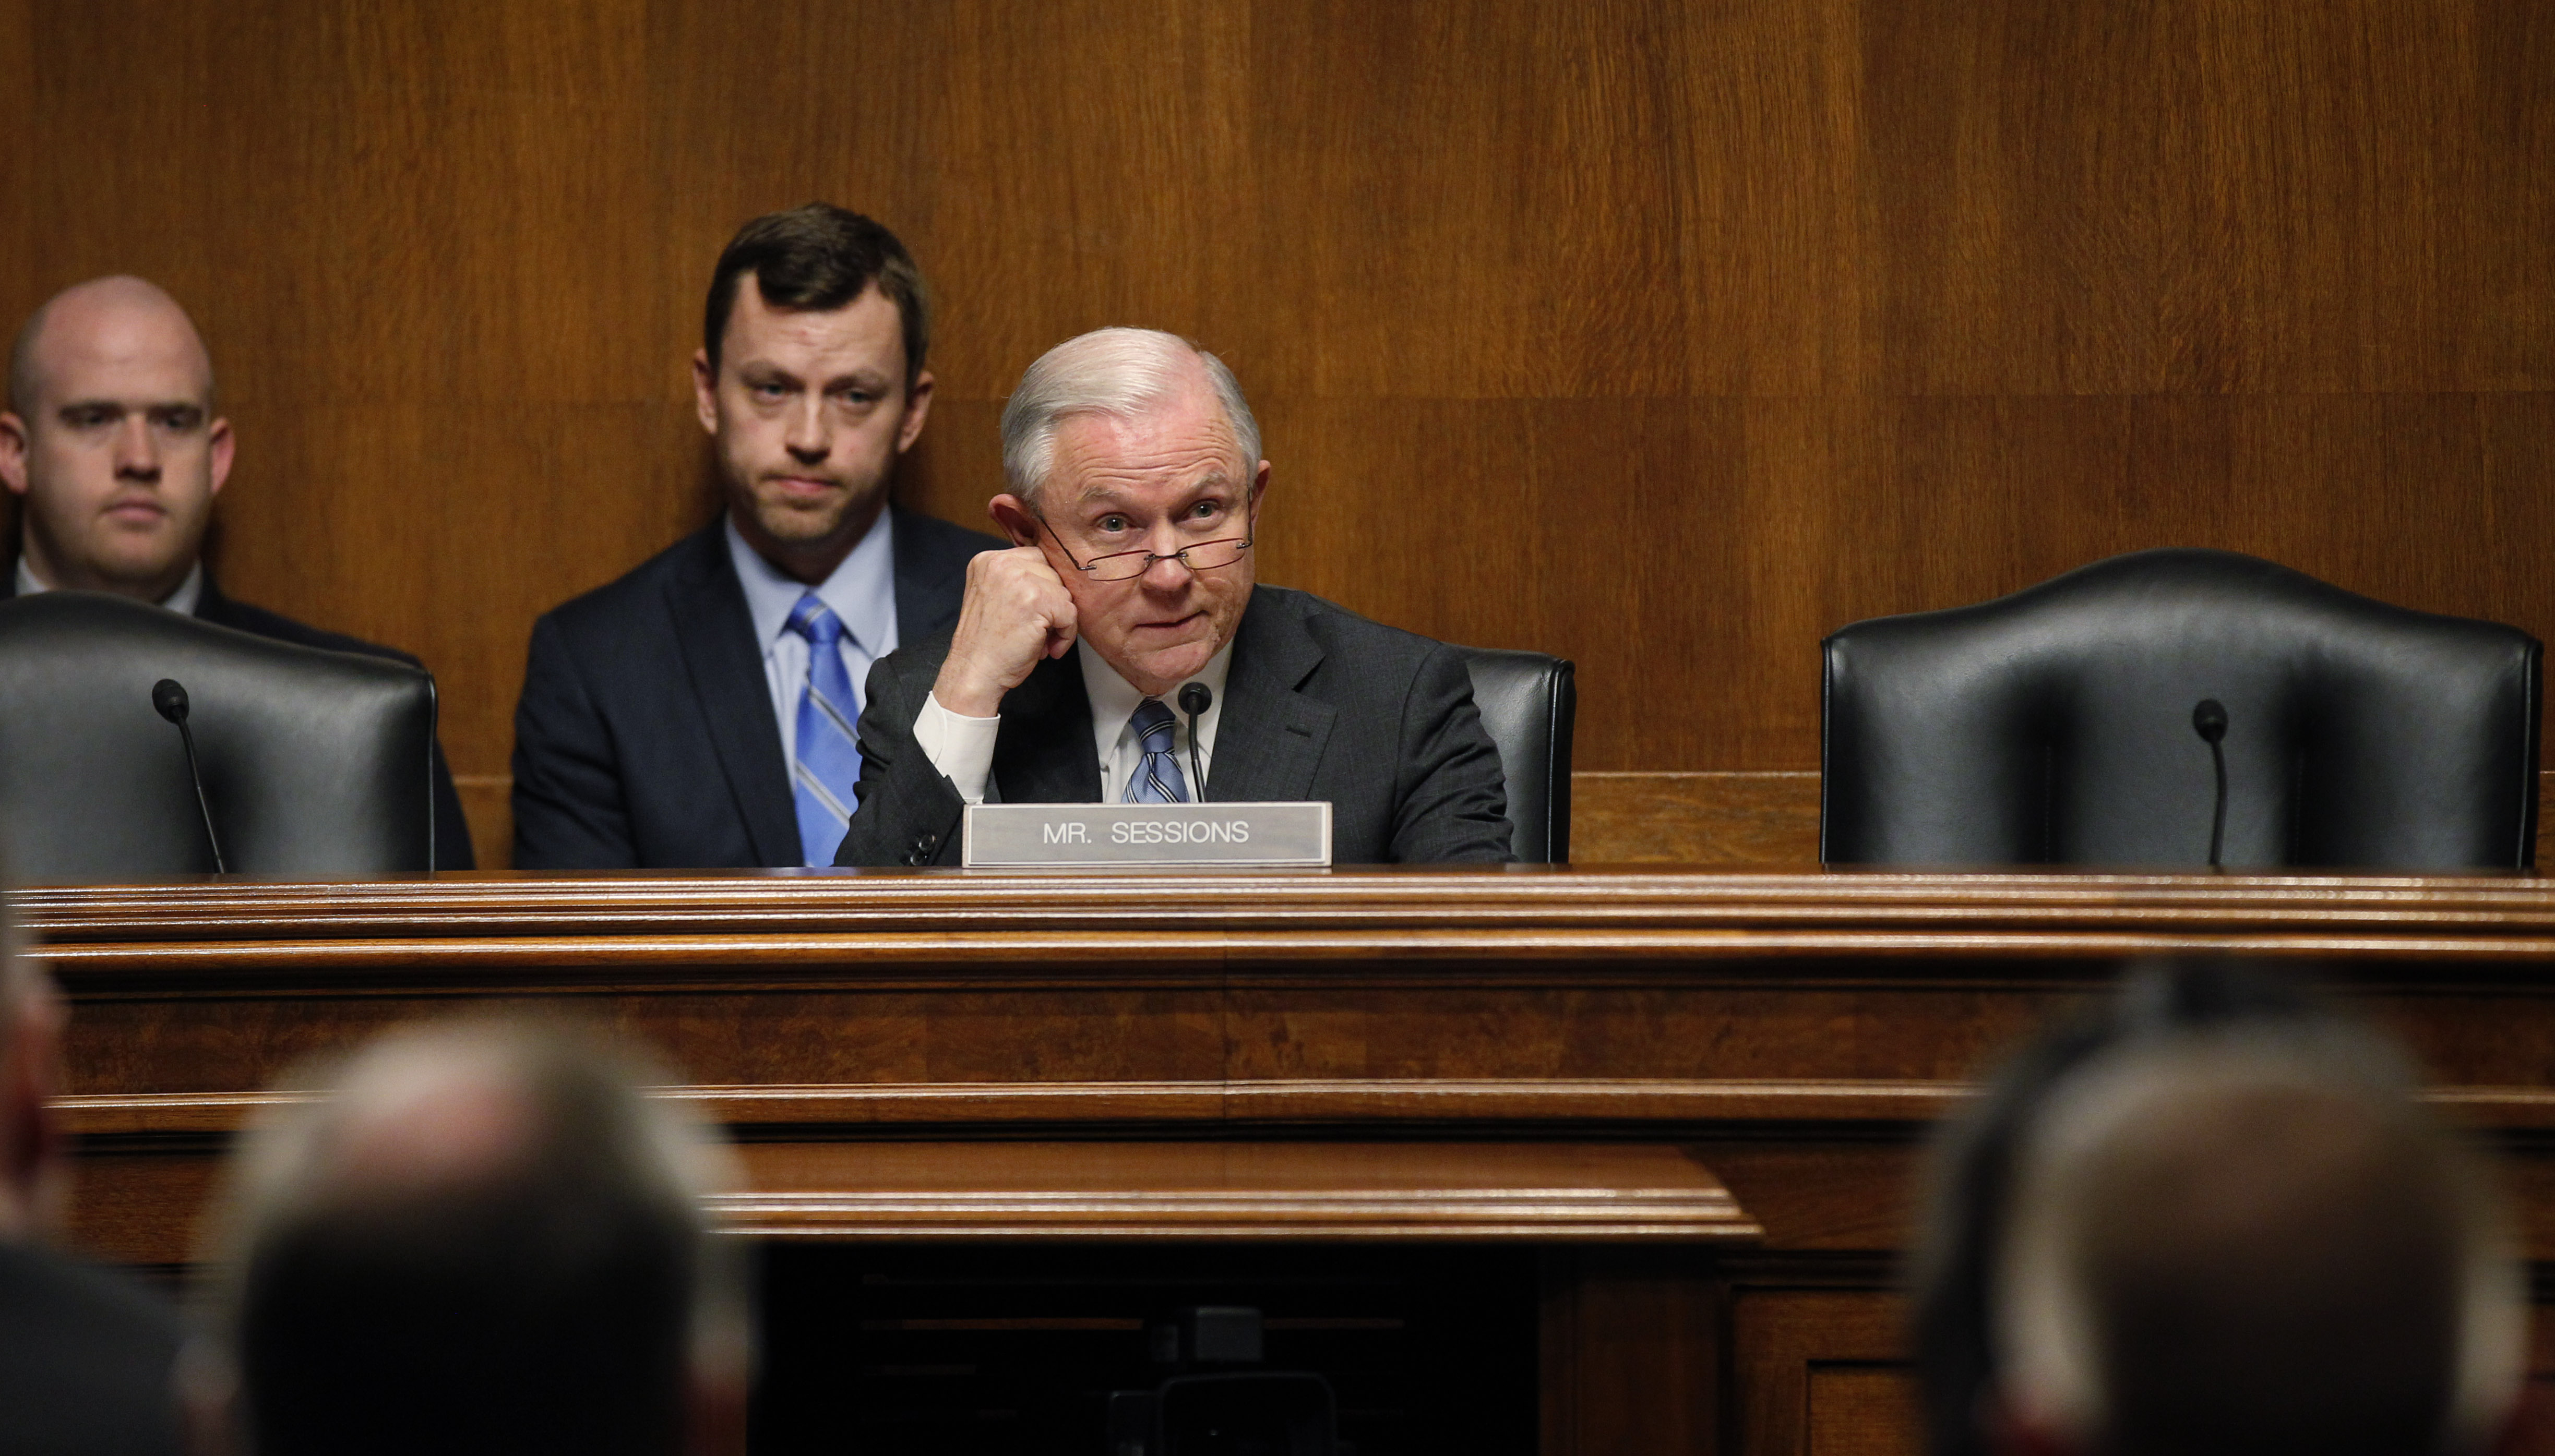 Portrait photo of Jeff Sessions during a testimony.